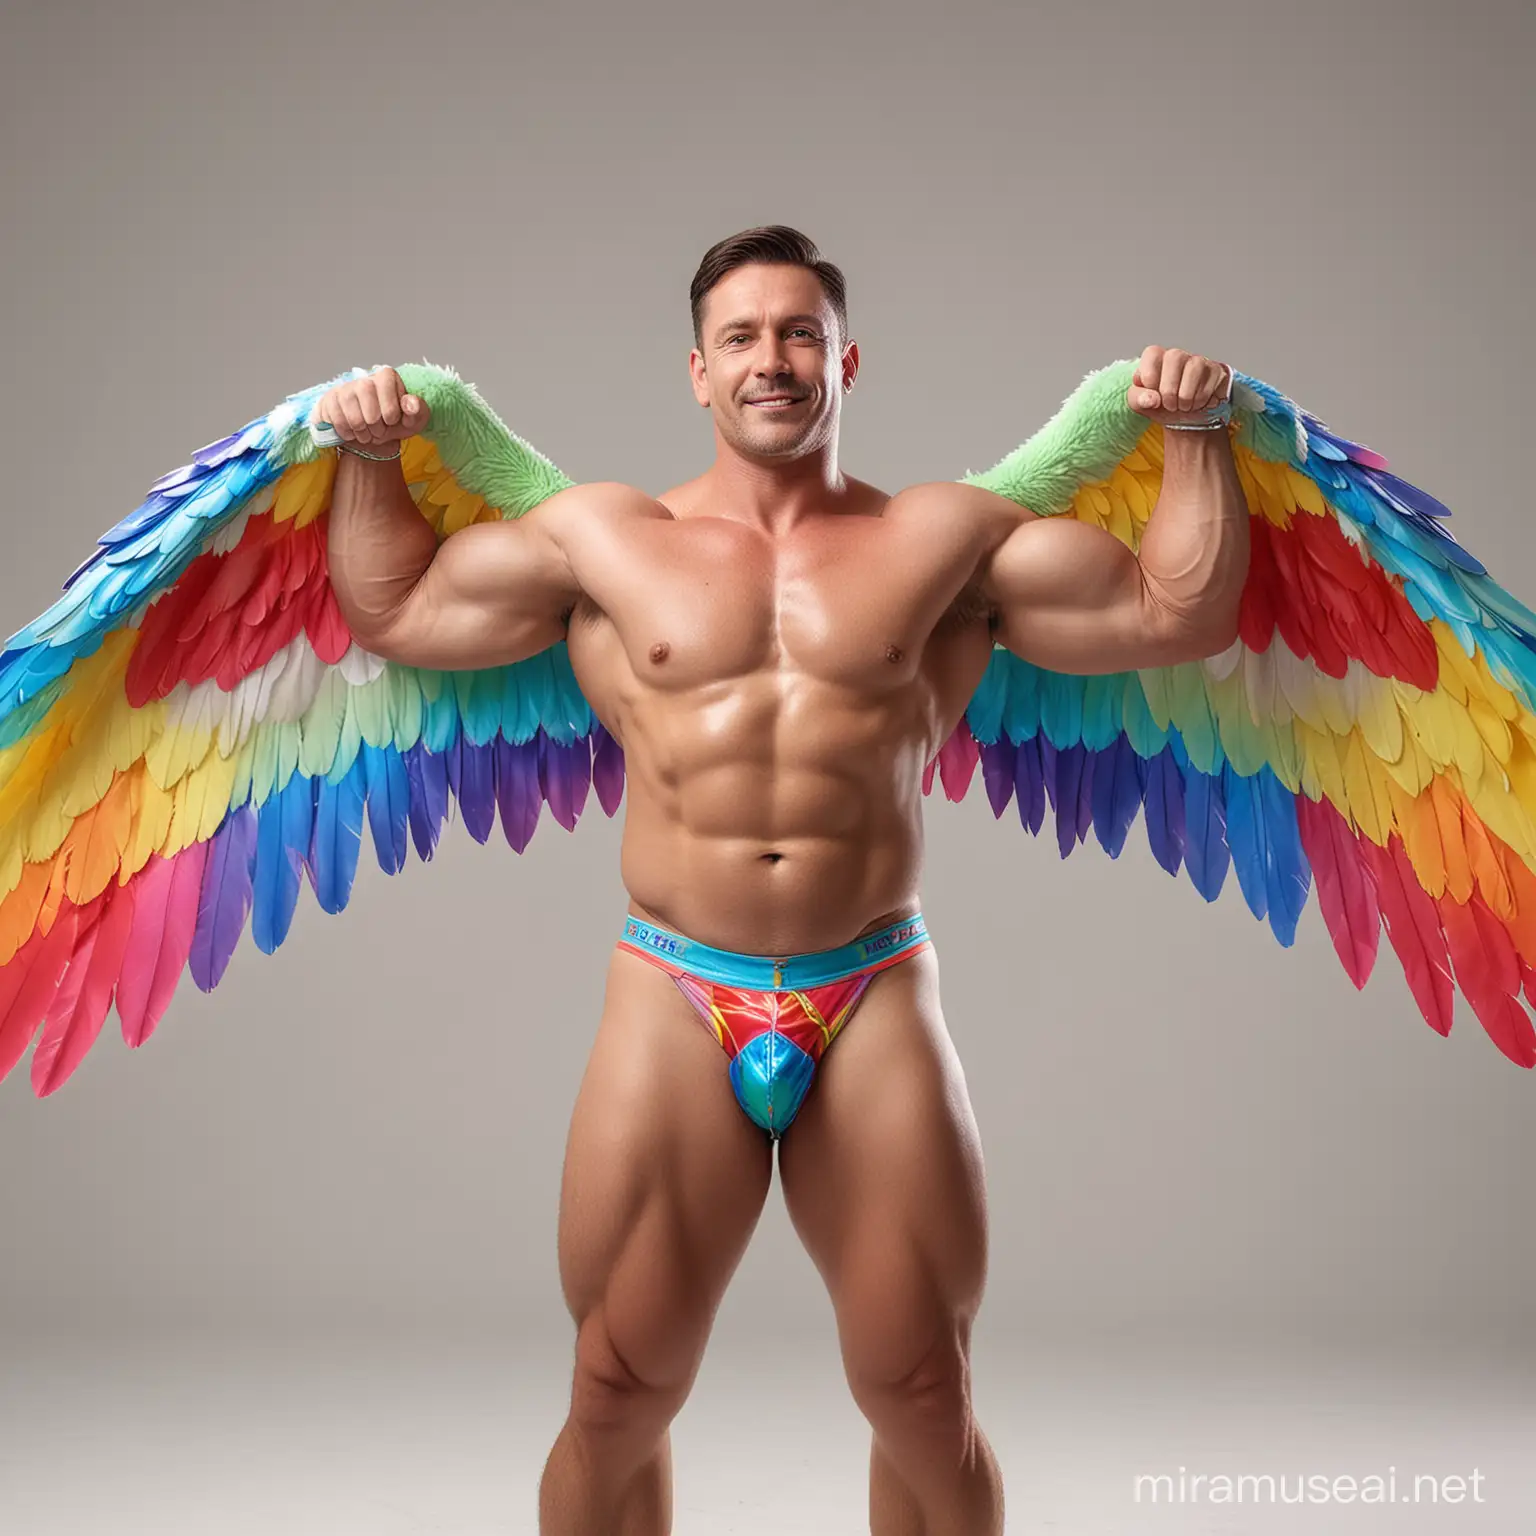 Studio Light Topless 30s Ultra Chunky Bodybuilder Daddy Wearing Multi-Highlighter Bright Rainbow Colored See Through huge Eagle Wings Shoulder Jacket short shorts and Flexing his Big Strong Arm Up with Doraemon